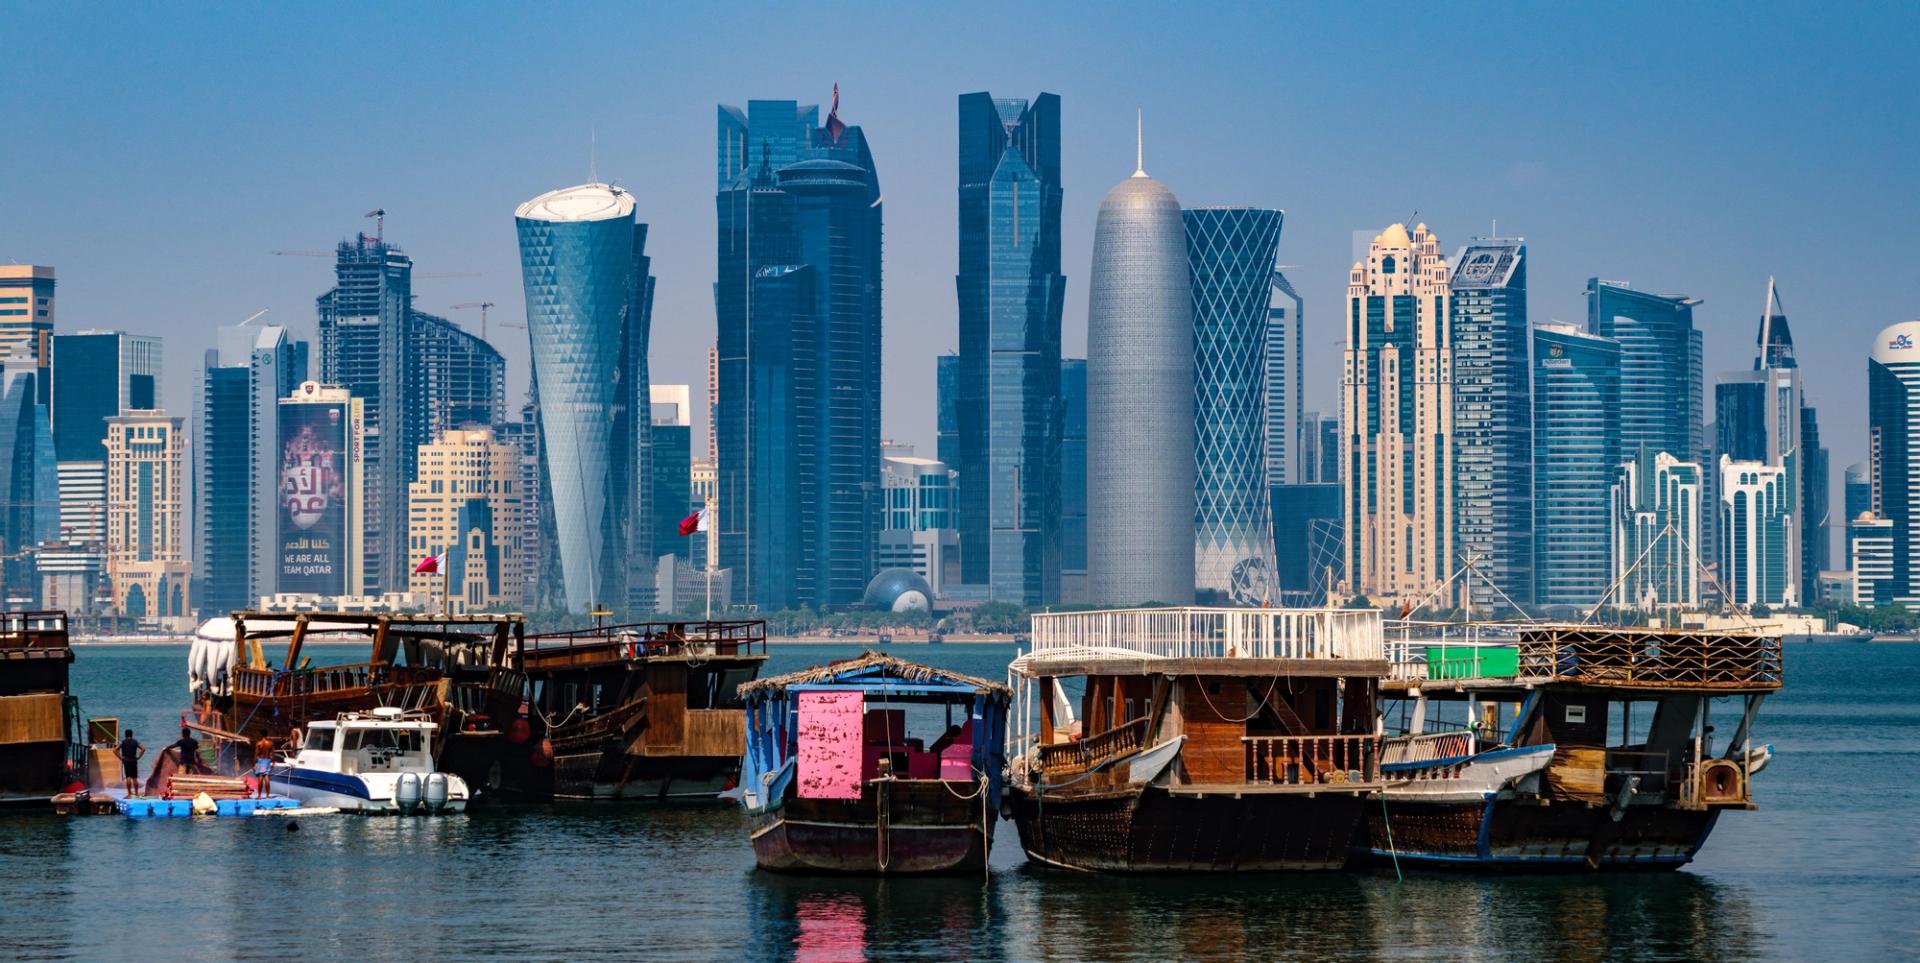 Cityscape of Doha. Traditional boats called a dhow. In the back the skyscrapers of the business district.